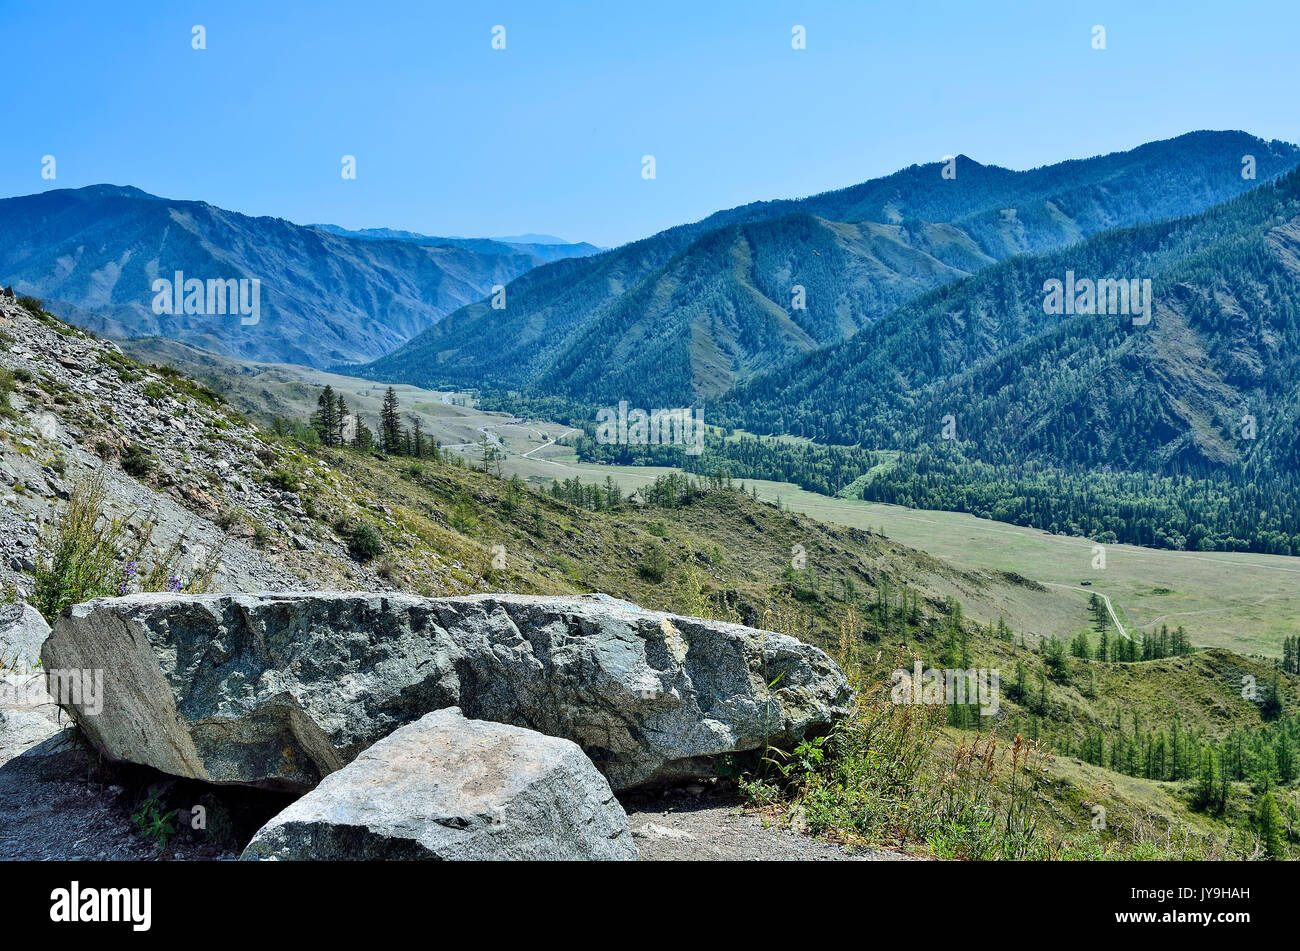 Beautiful summer mountains landscape, Altai, Russia. Mountain ridges covered with forest, a road through the valley and two large boulders at foregrou Stock Photo